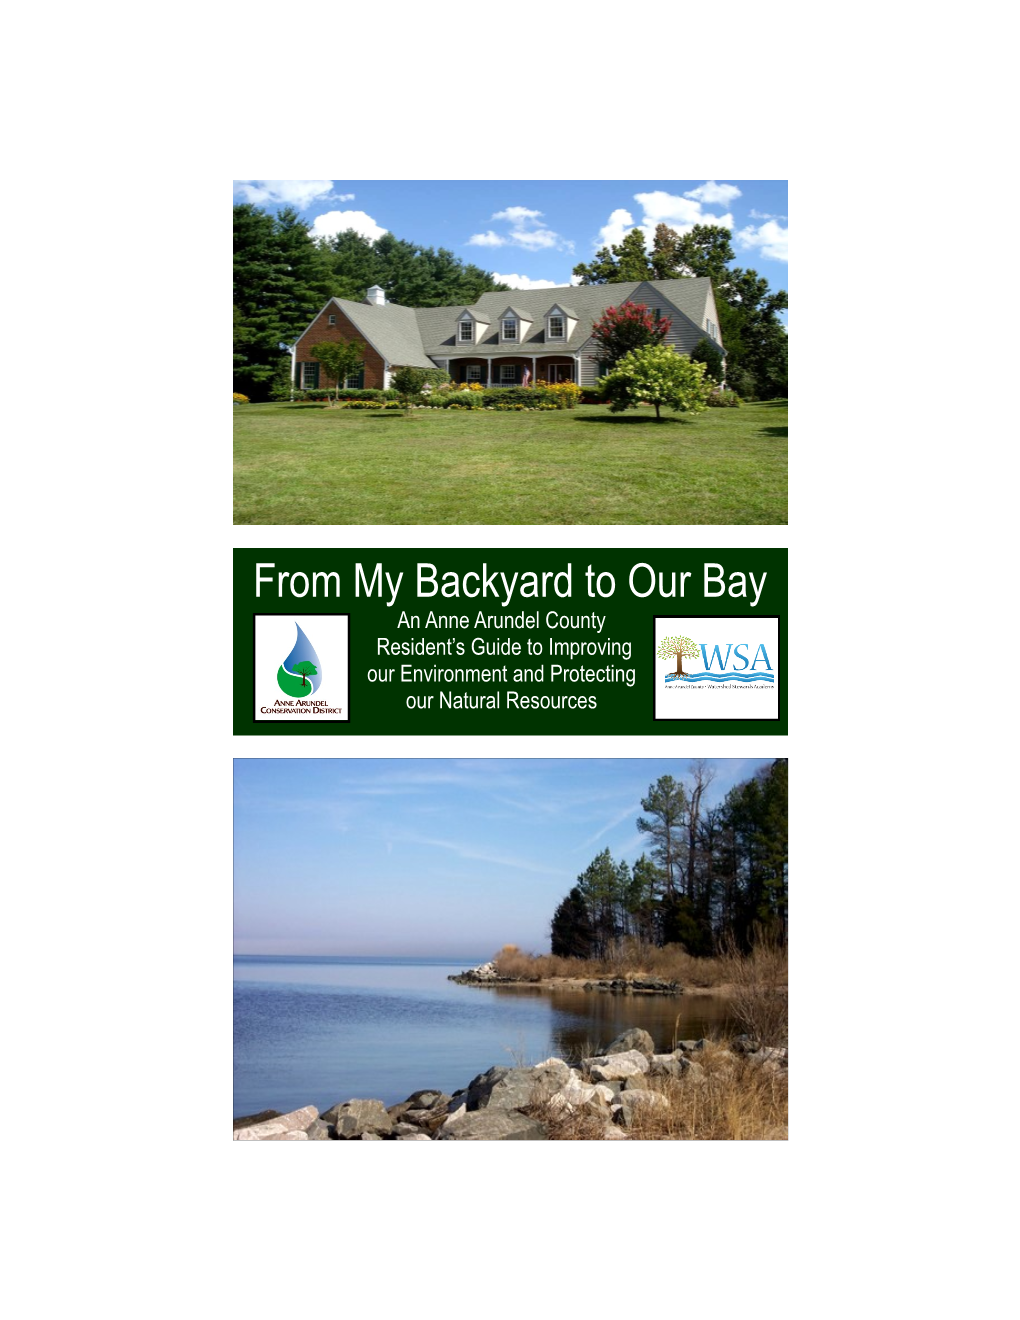 From My Backyard to Our Bay an Anne Arundel County Resident’S Guide to Improving Our Environment and Protecting Our Natural Resources